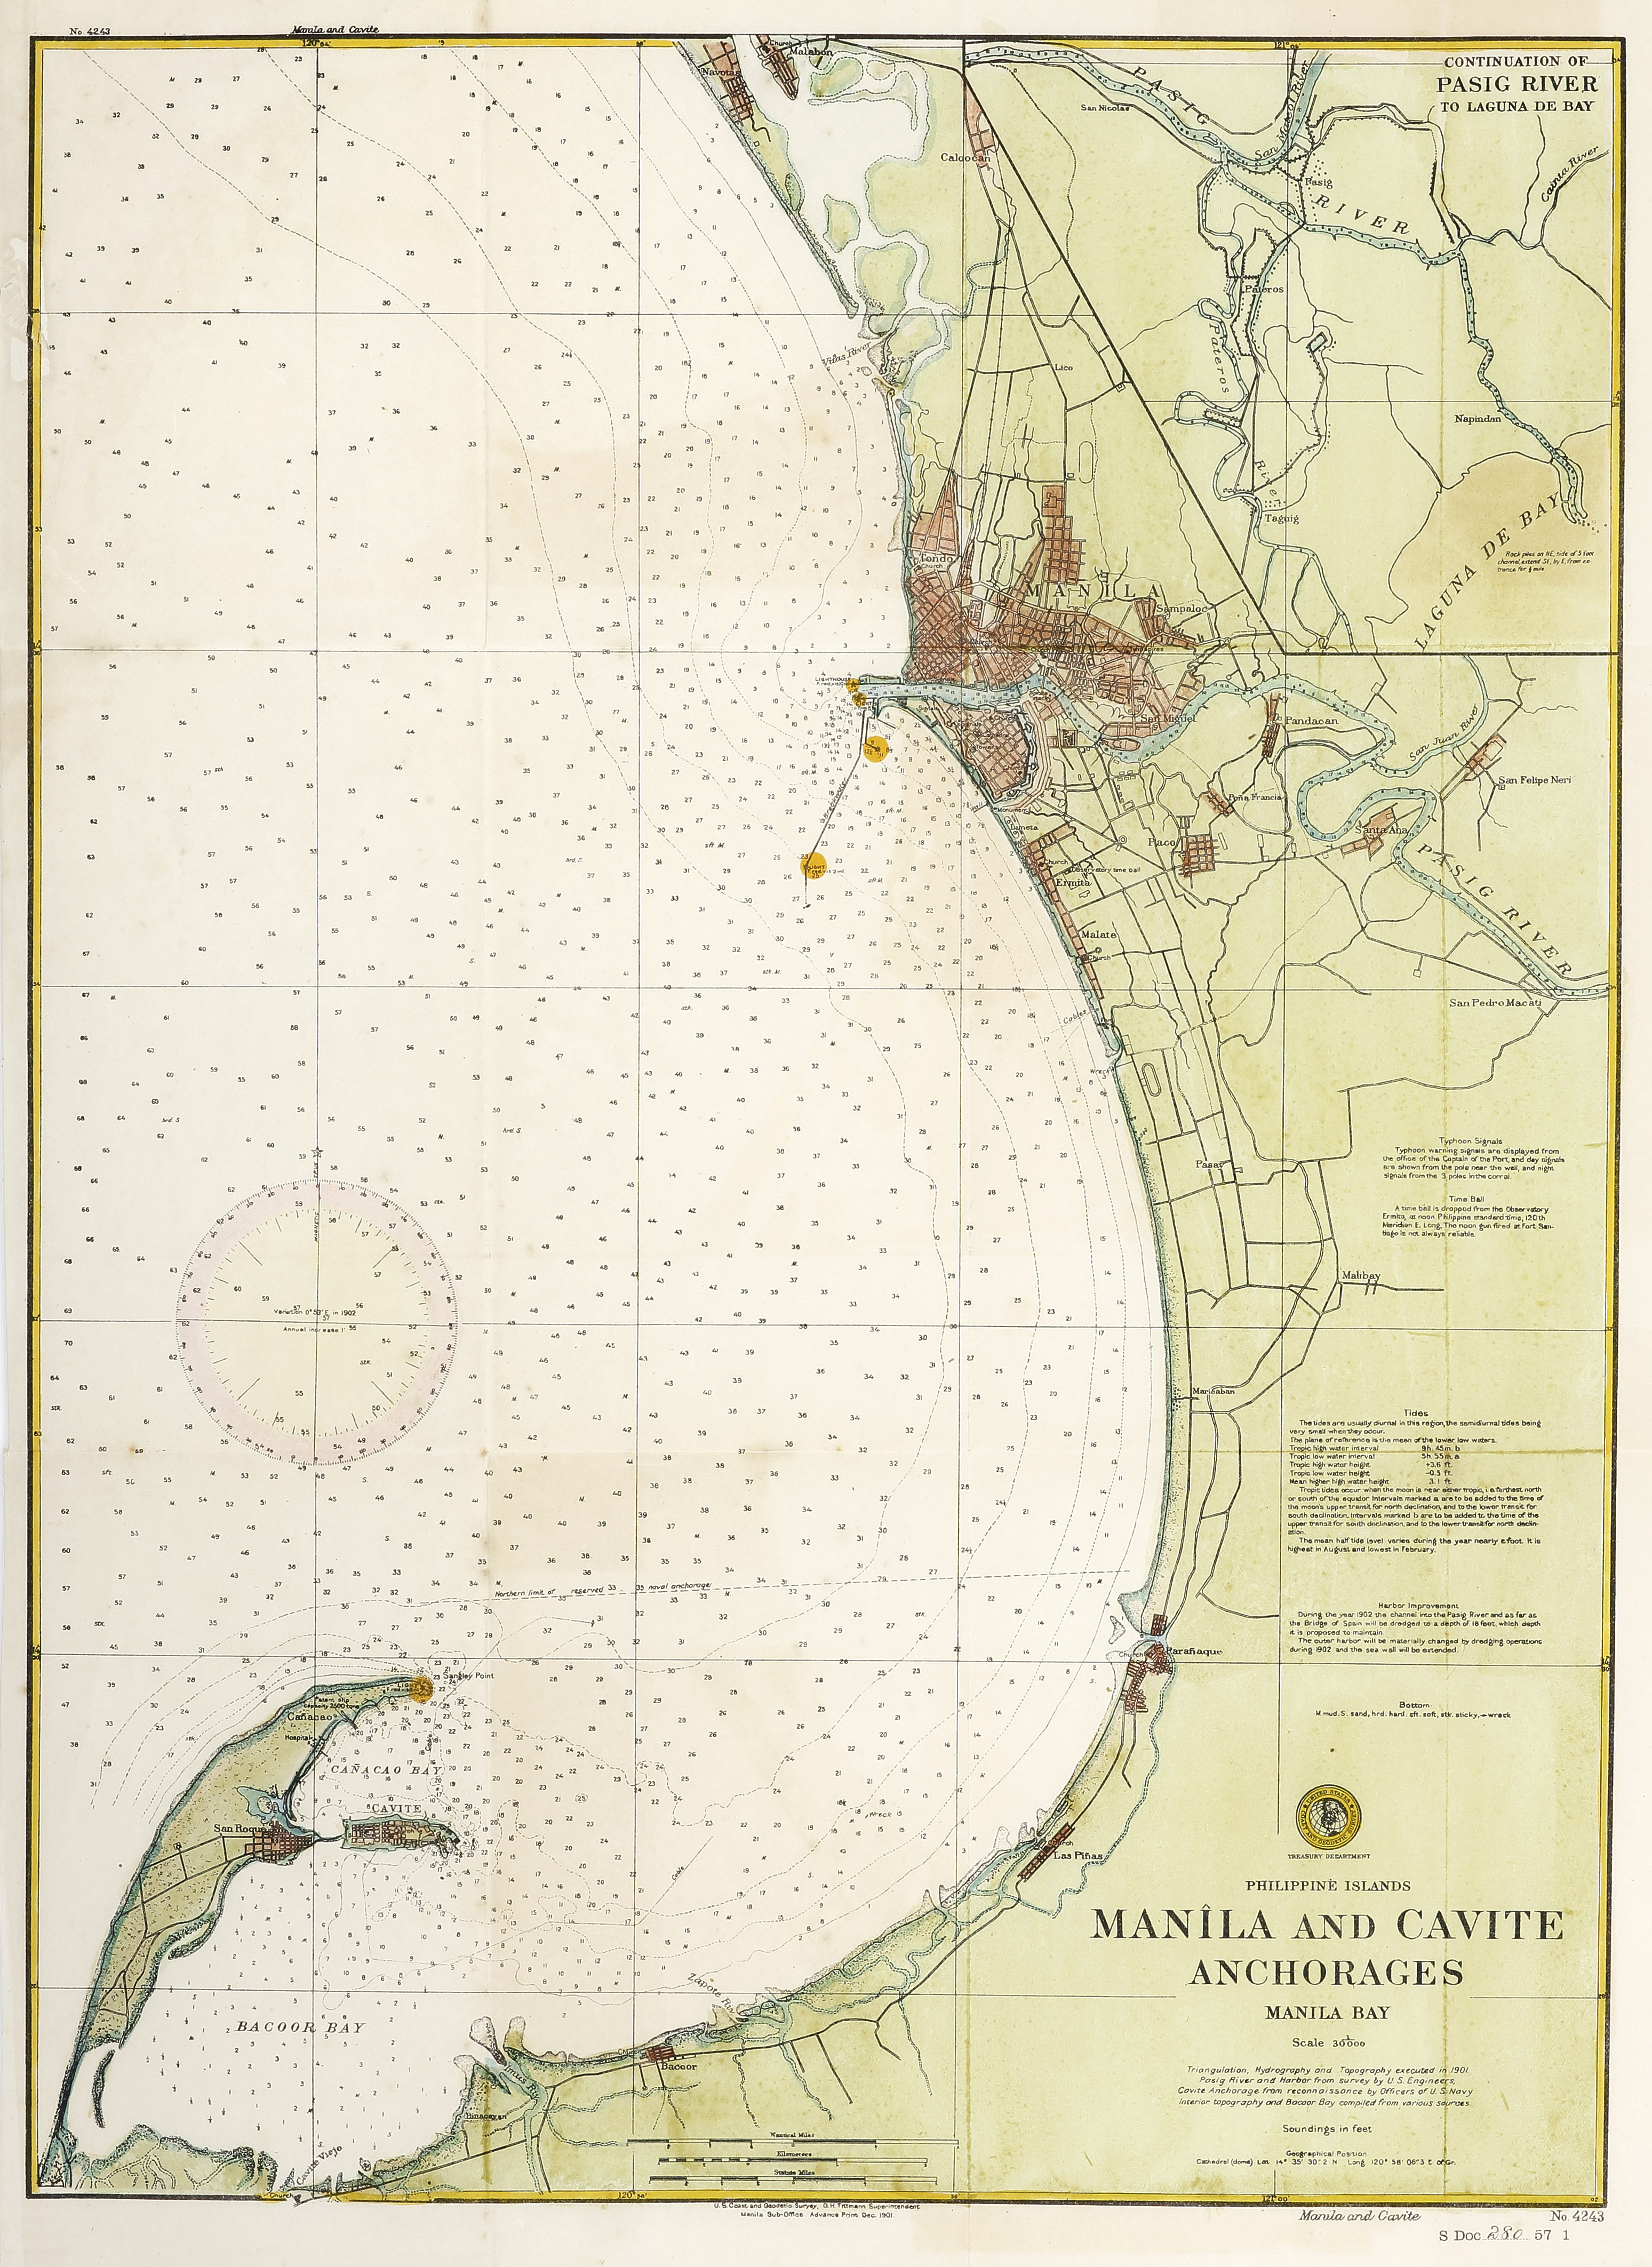 Manila and Cavite Anchorages Manila Bay. - Antique Map from 1901